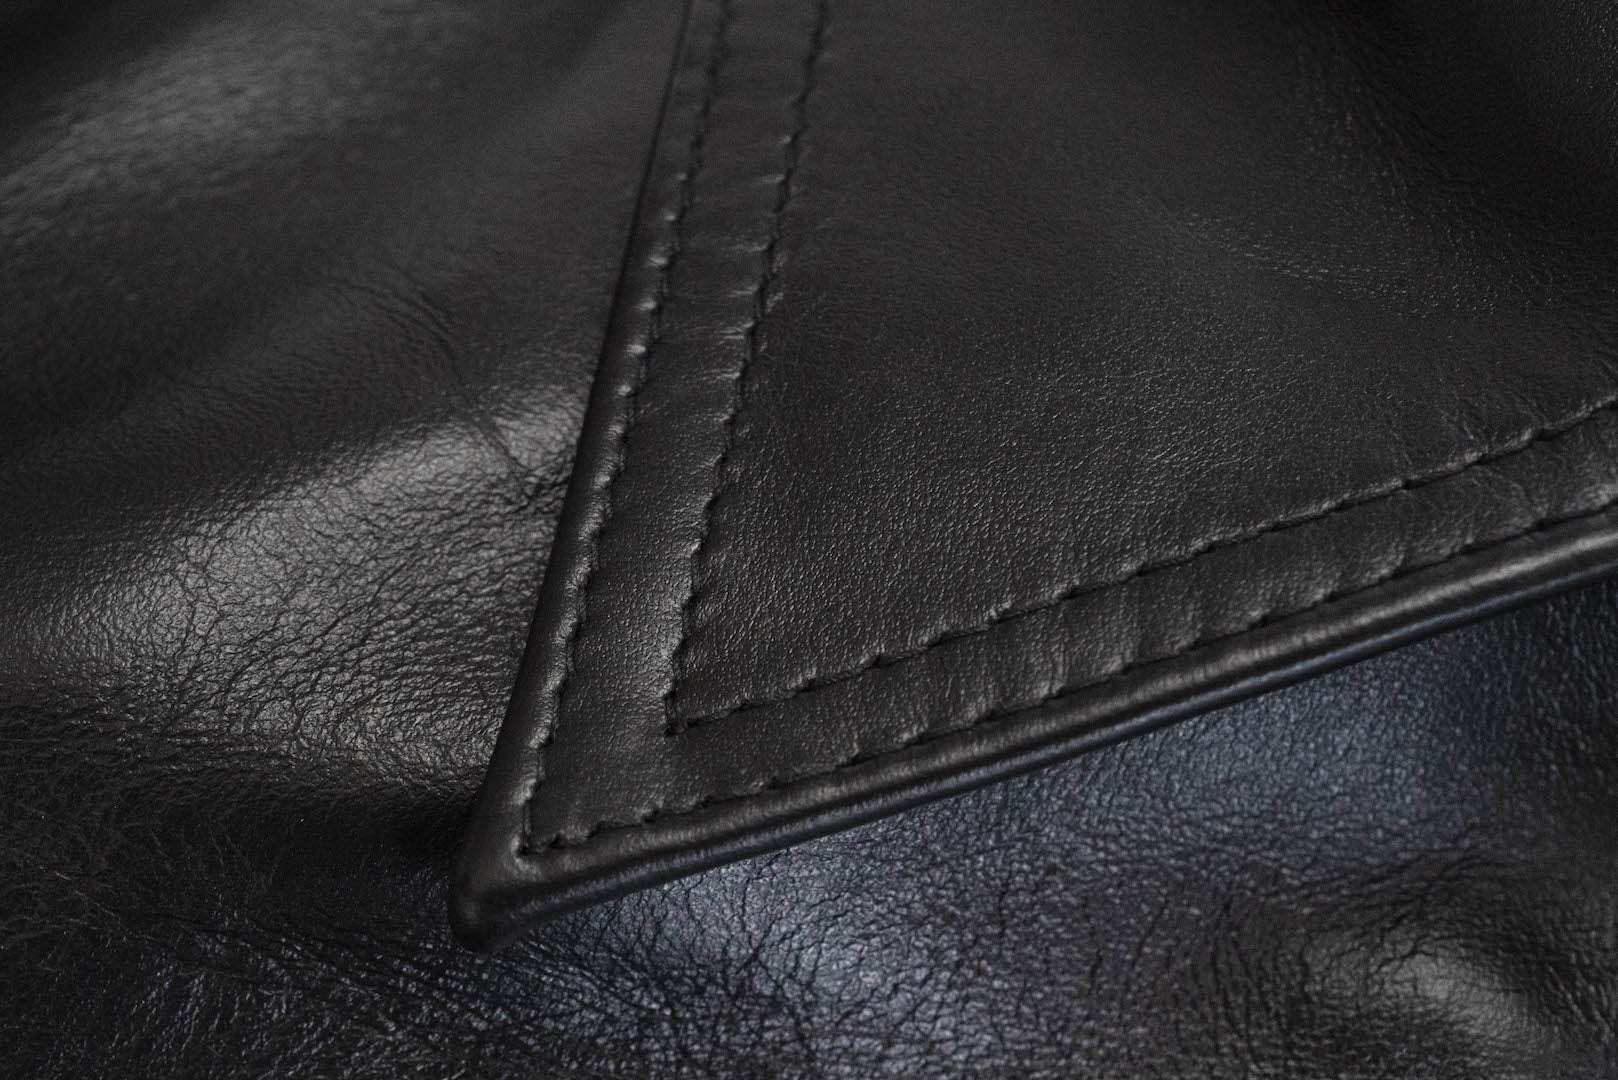 Lewis Leathers Black Horsehide Corsair 60T (Tight fit)